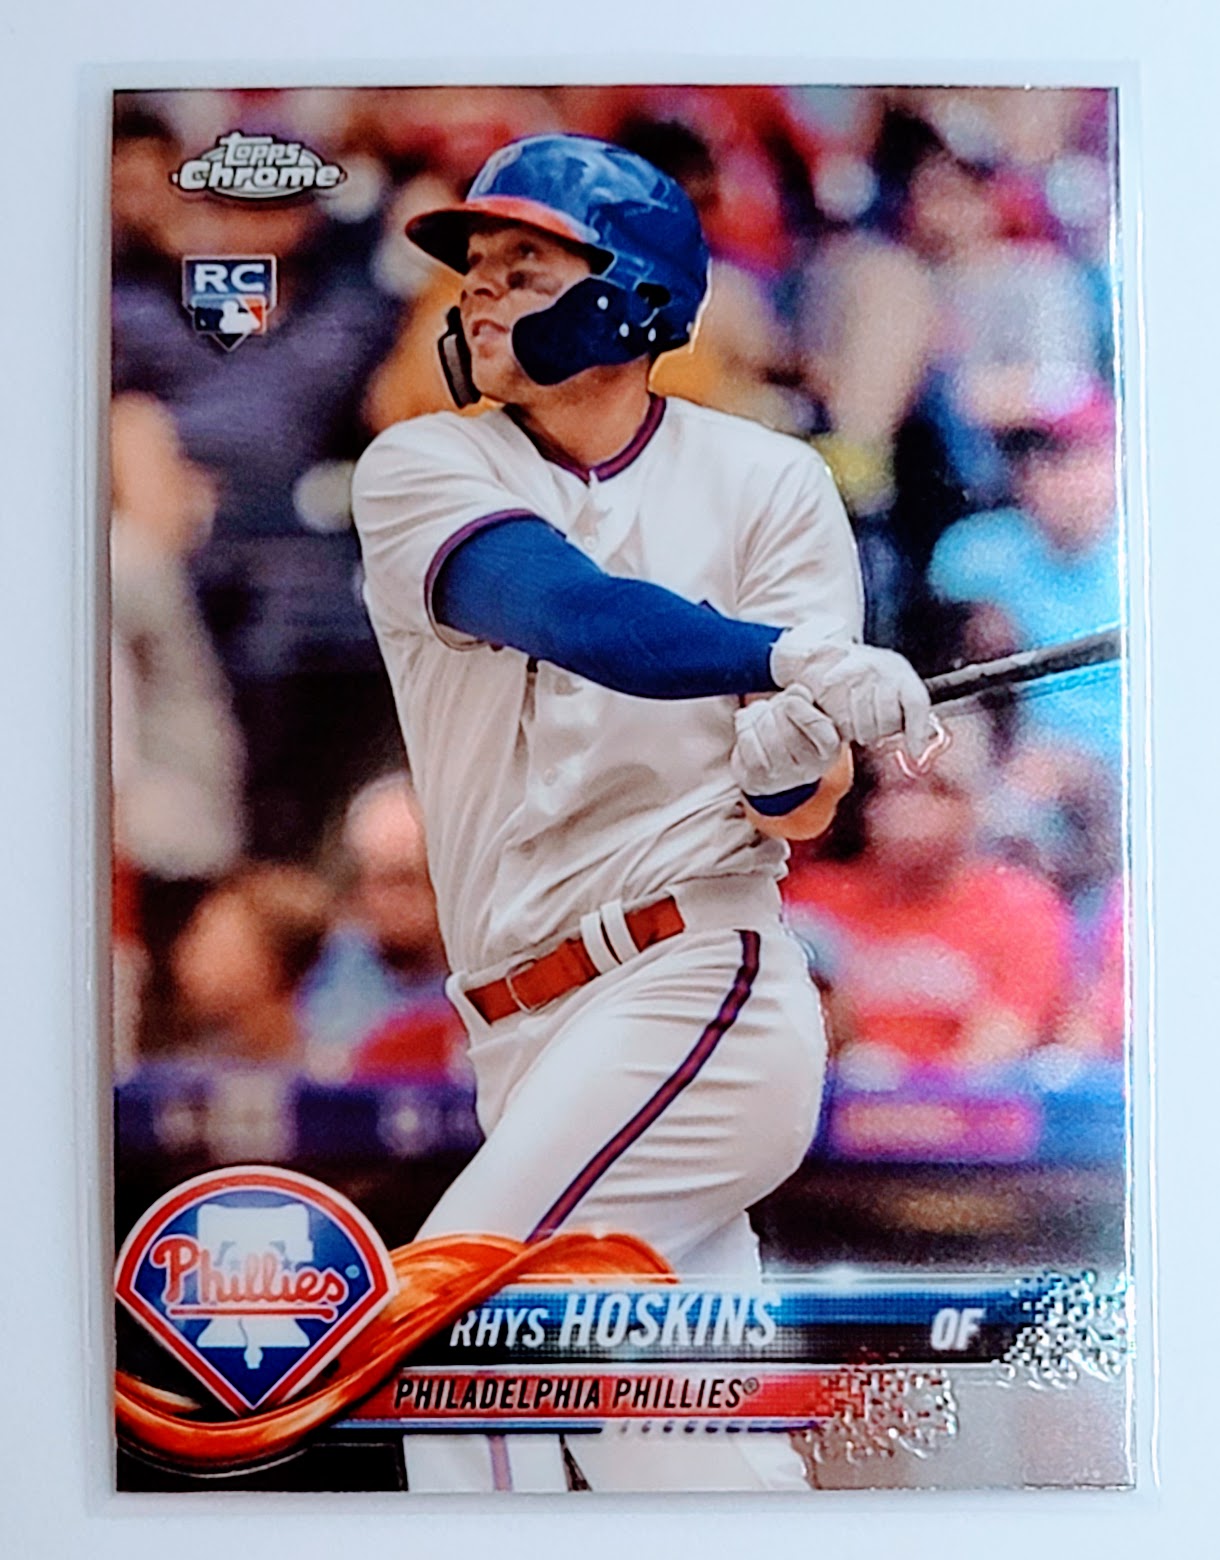 2018 Topps Chrome Update
  Edition Rhys Hoskins Rookie
  Baseball Card  TH13C simple Xclusive Collectibles   